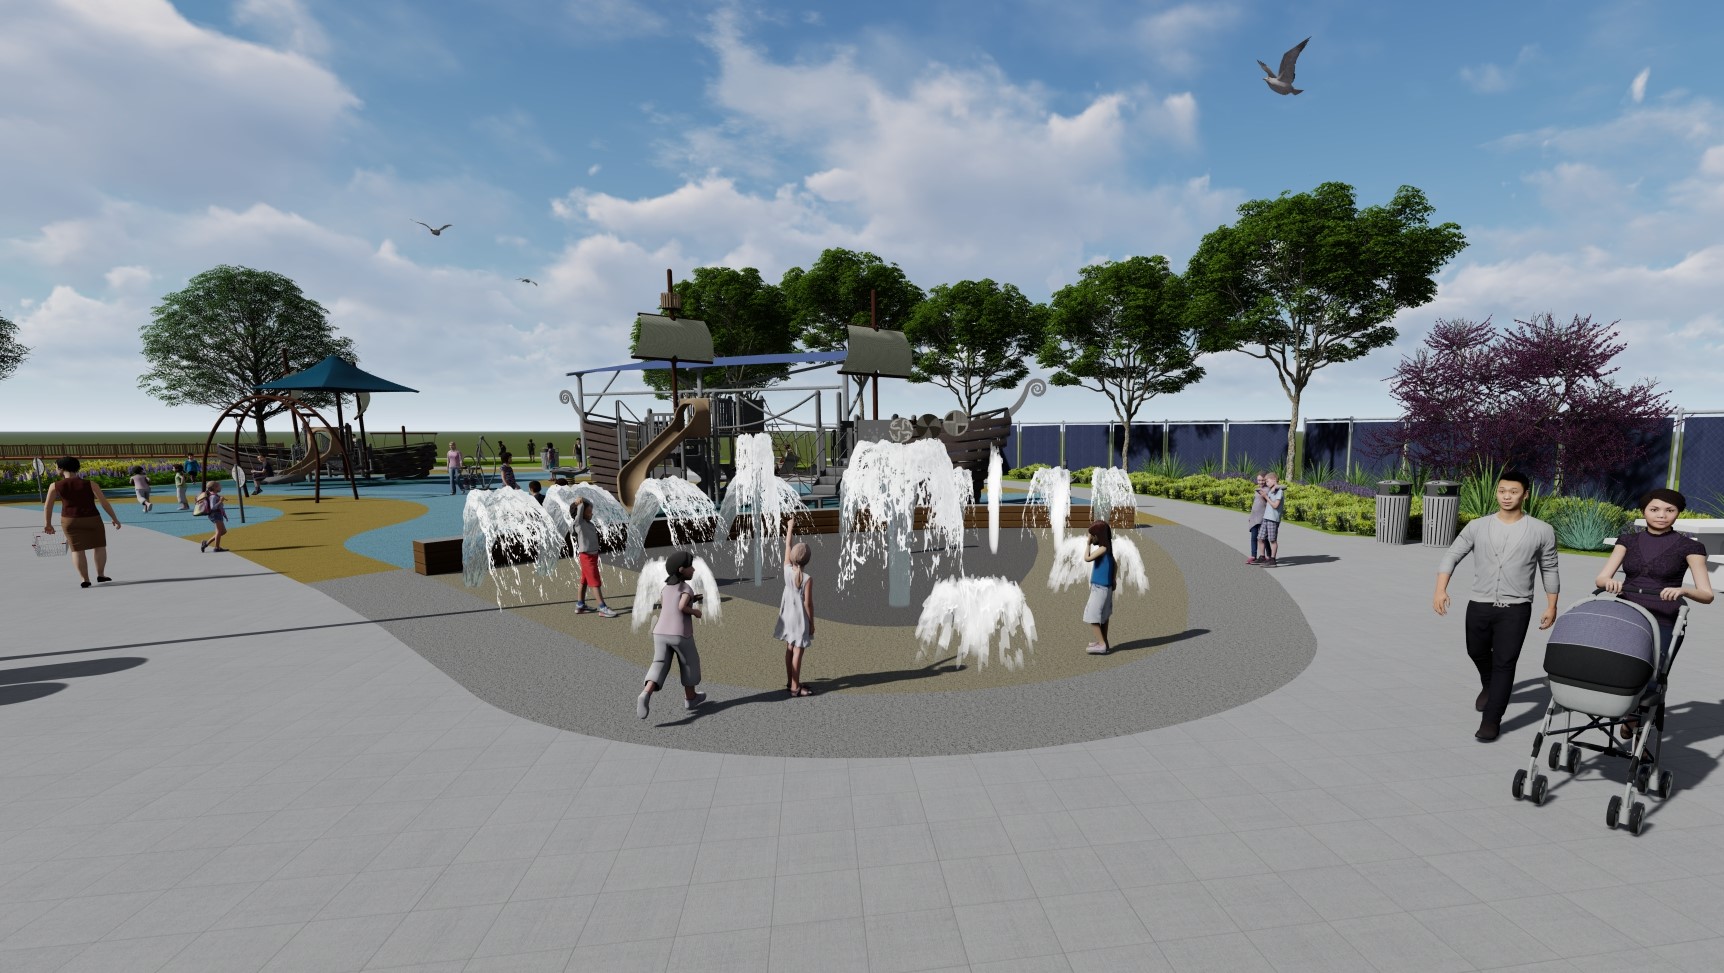 Conceptual rendering of splash pad for Pepper Park on National City Bayfront. Depicts children playing and running through water spraying from the ground with pedestrians strolling by set with a backdrop of a blue sky with white clouds and birds and green trees.